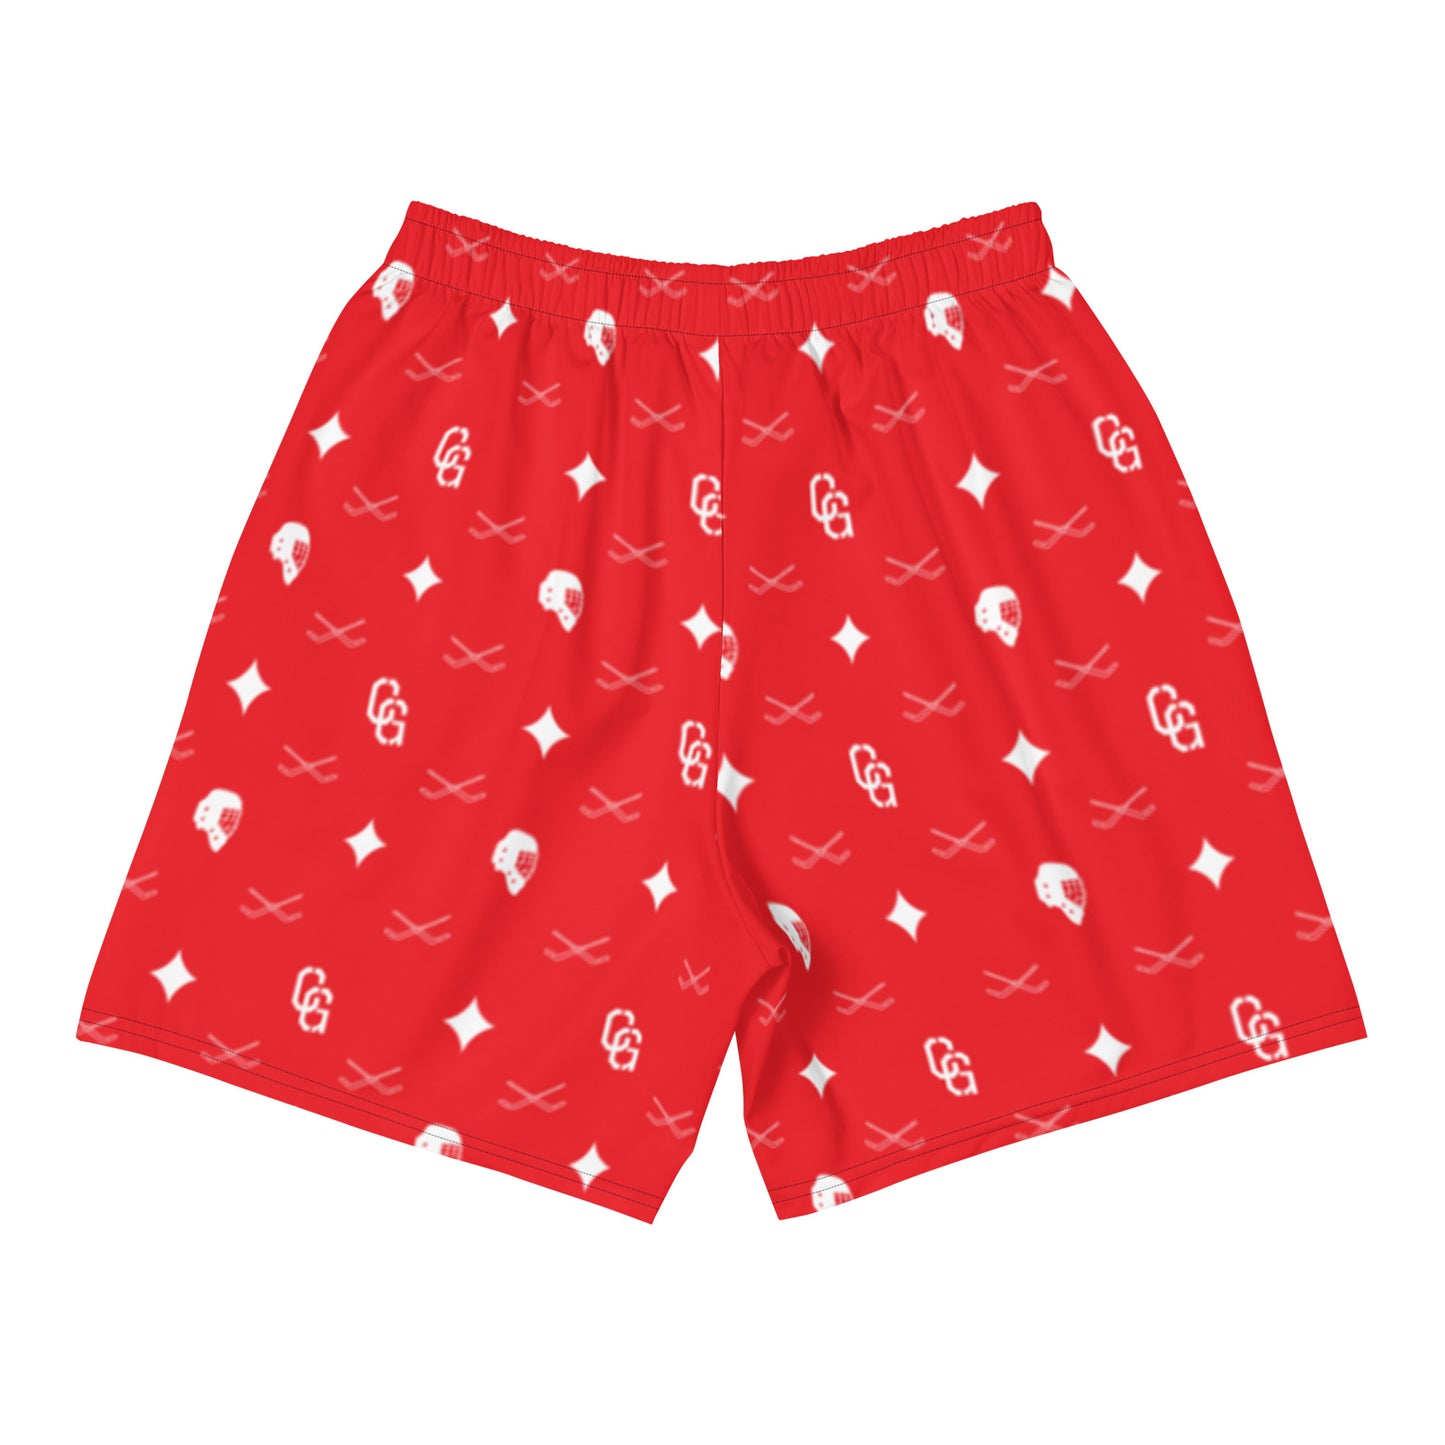 Men's Red Lux Print Athletic Shorts